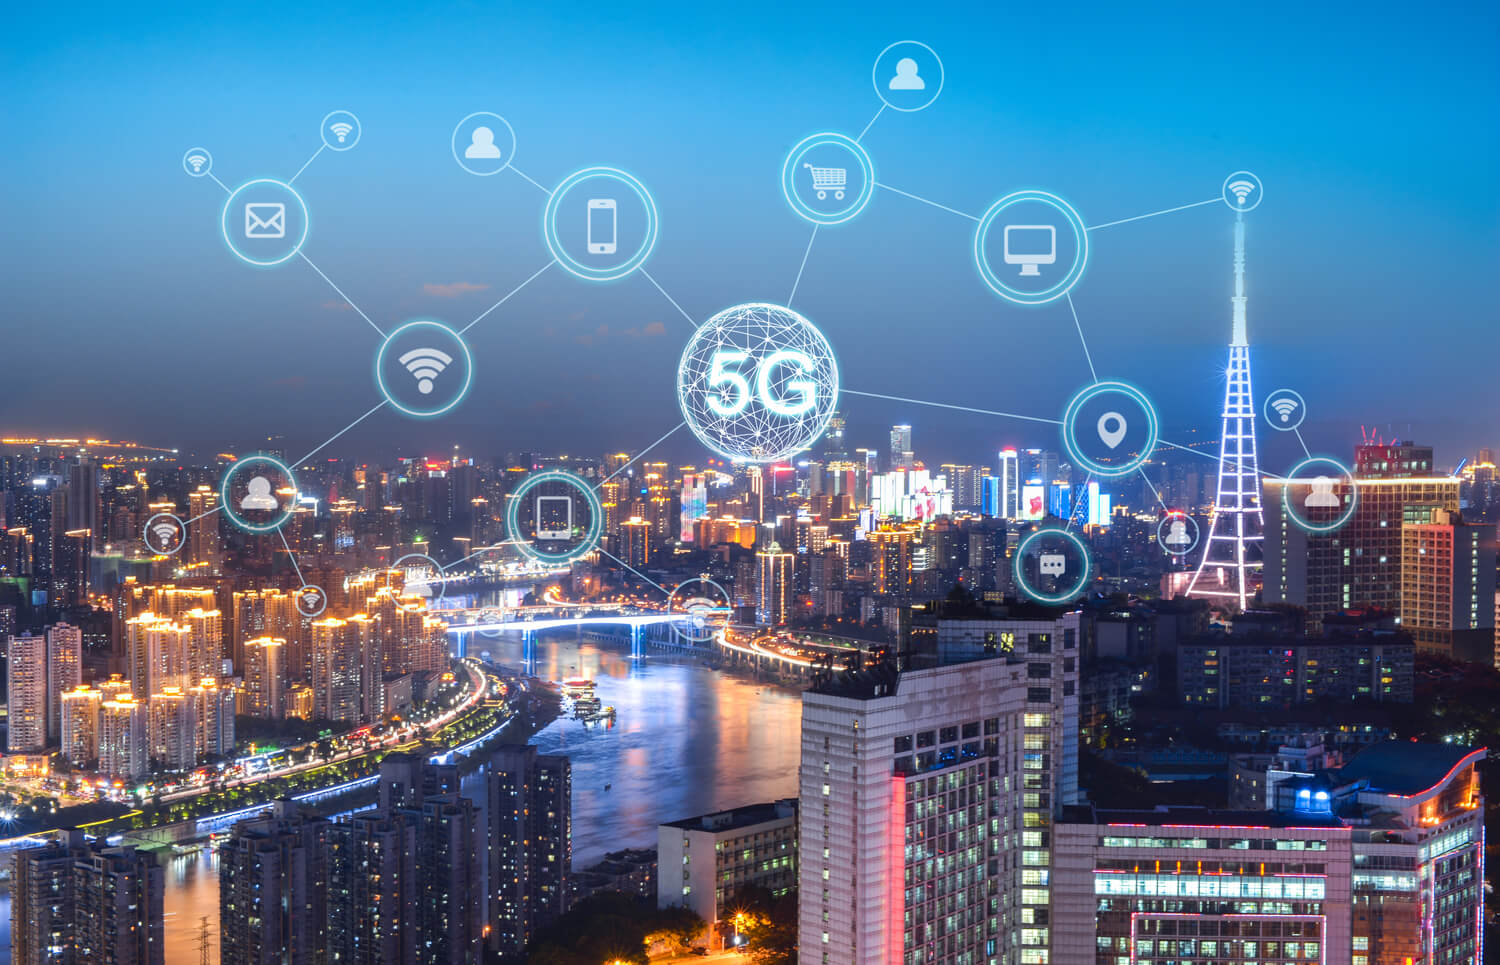 5G: Shaping the Future of Communication Networks